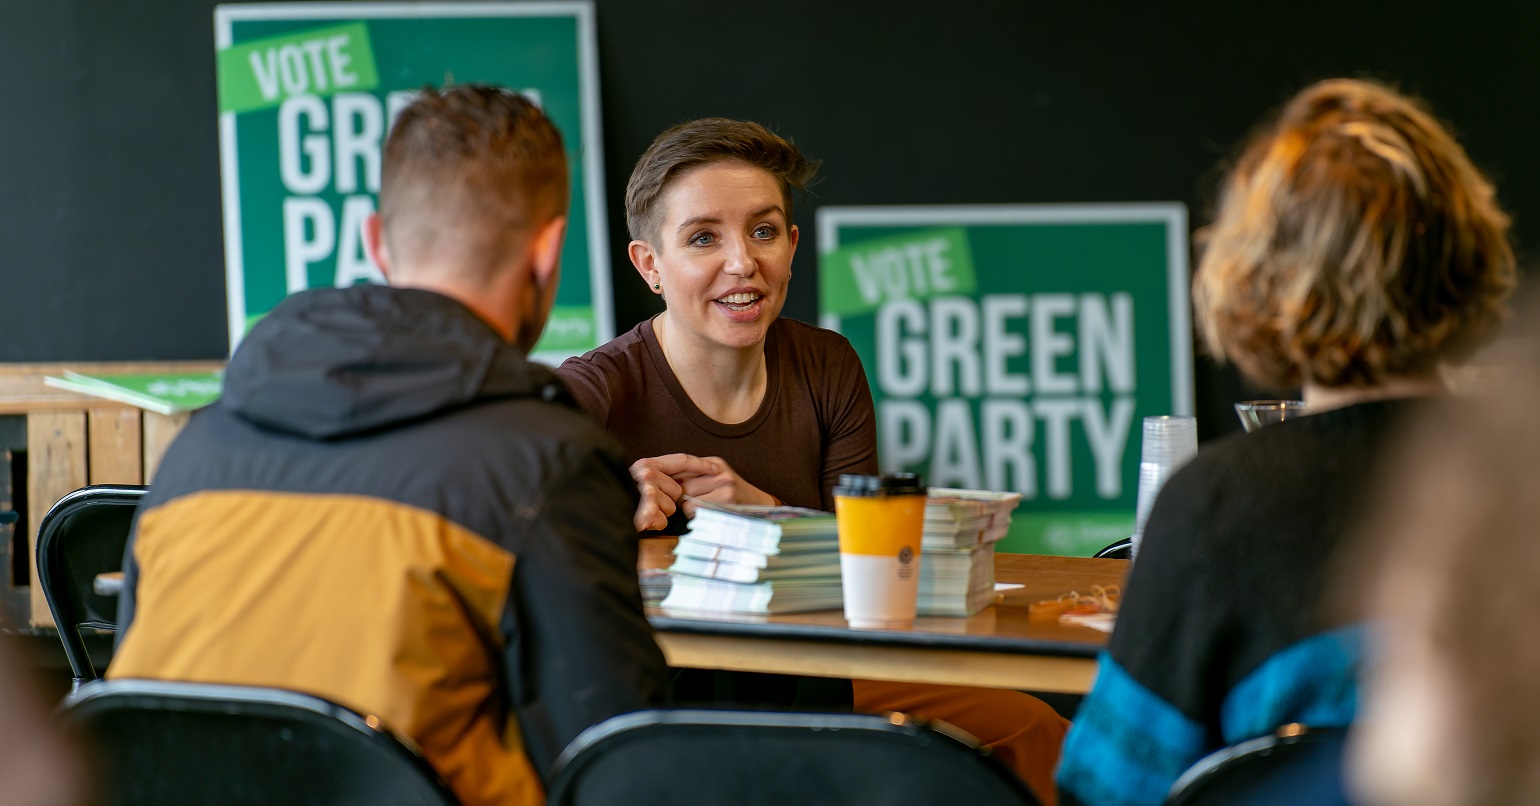 Green Party co-leader Carla Denyer sitting at a table talking with two other people. Two posters behind her read "Vote Green Party"